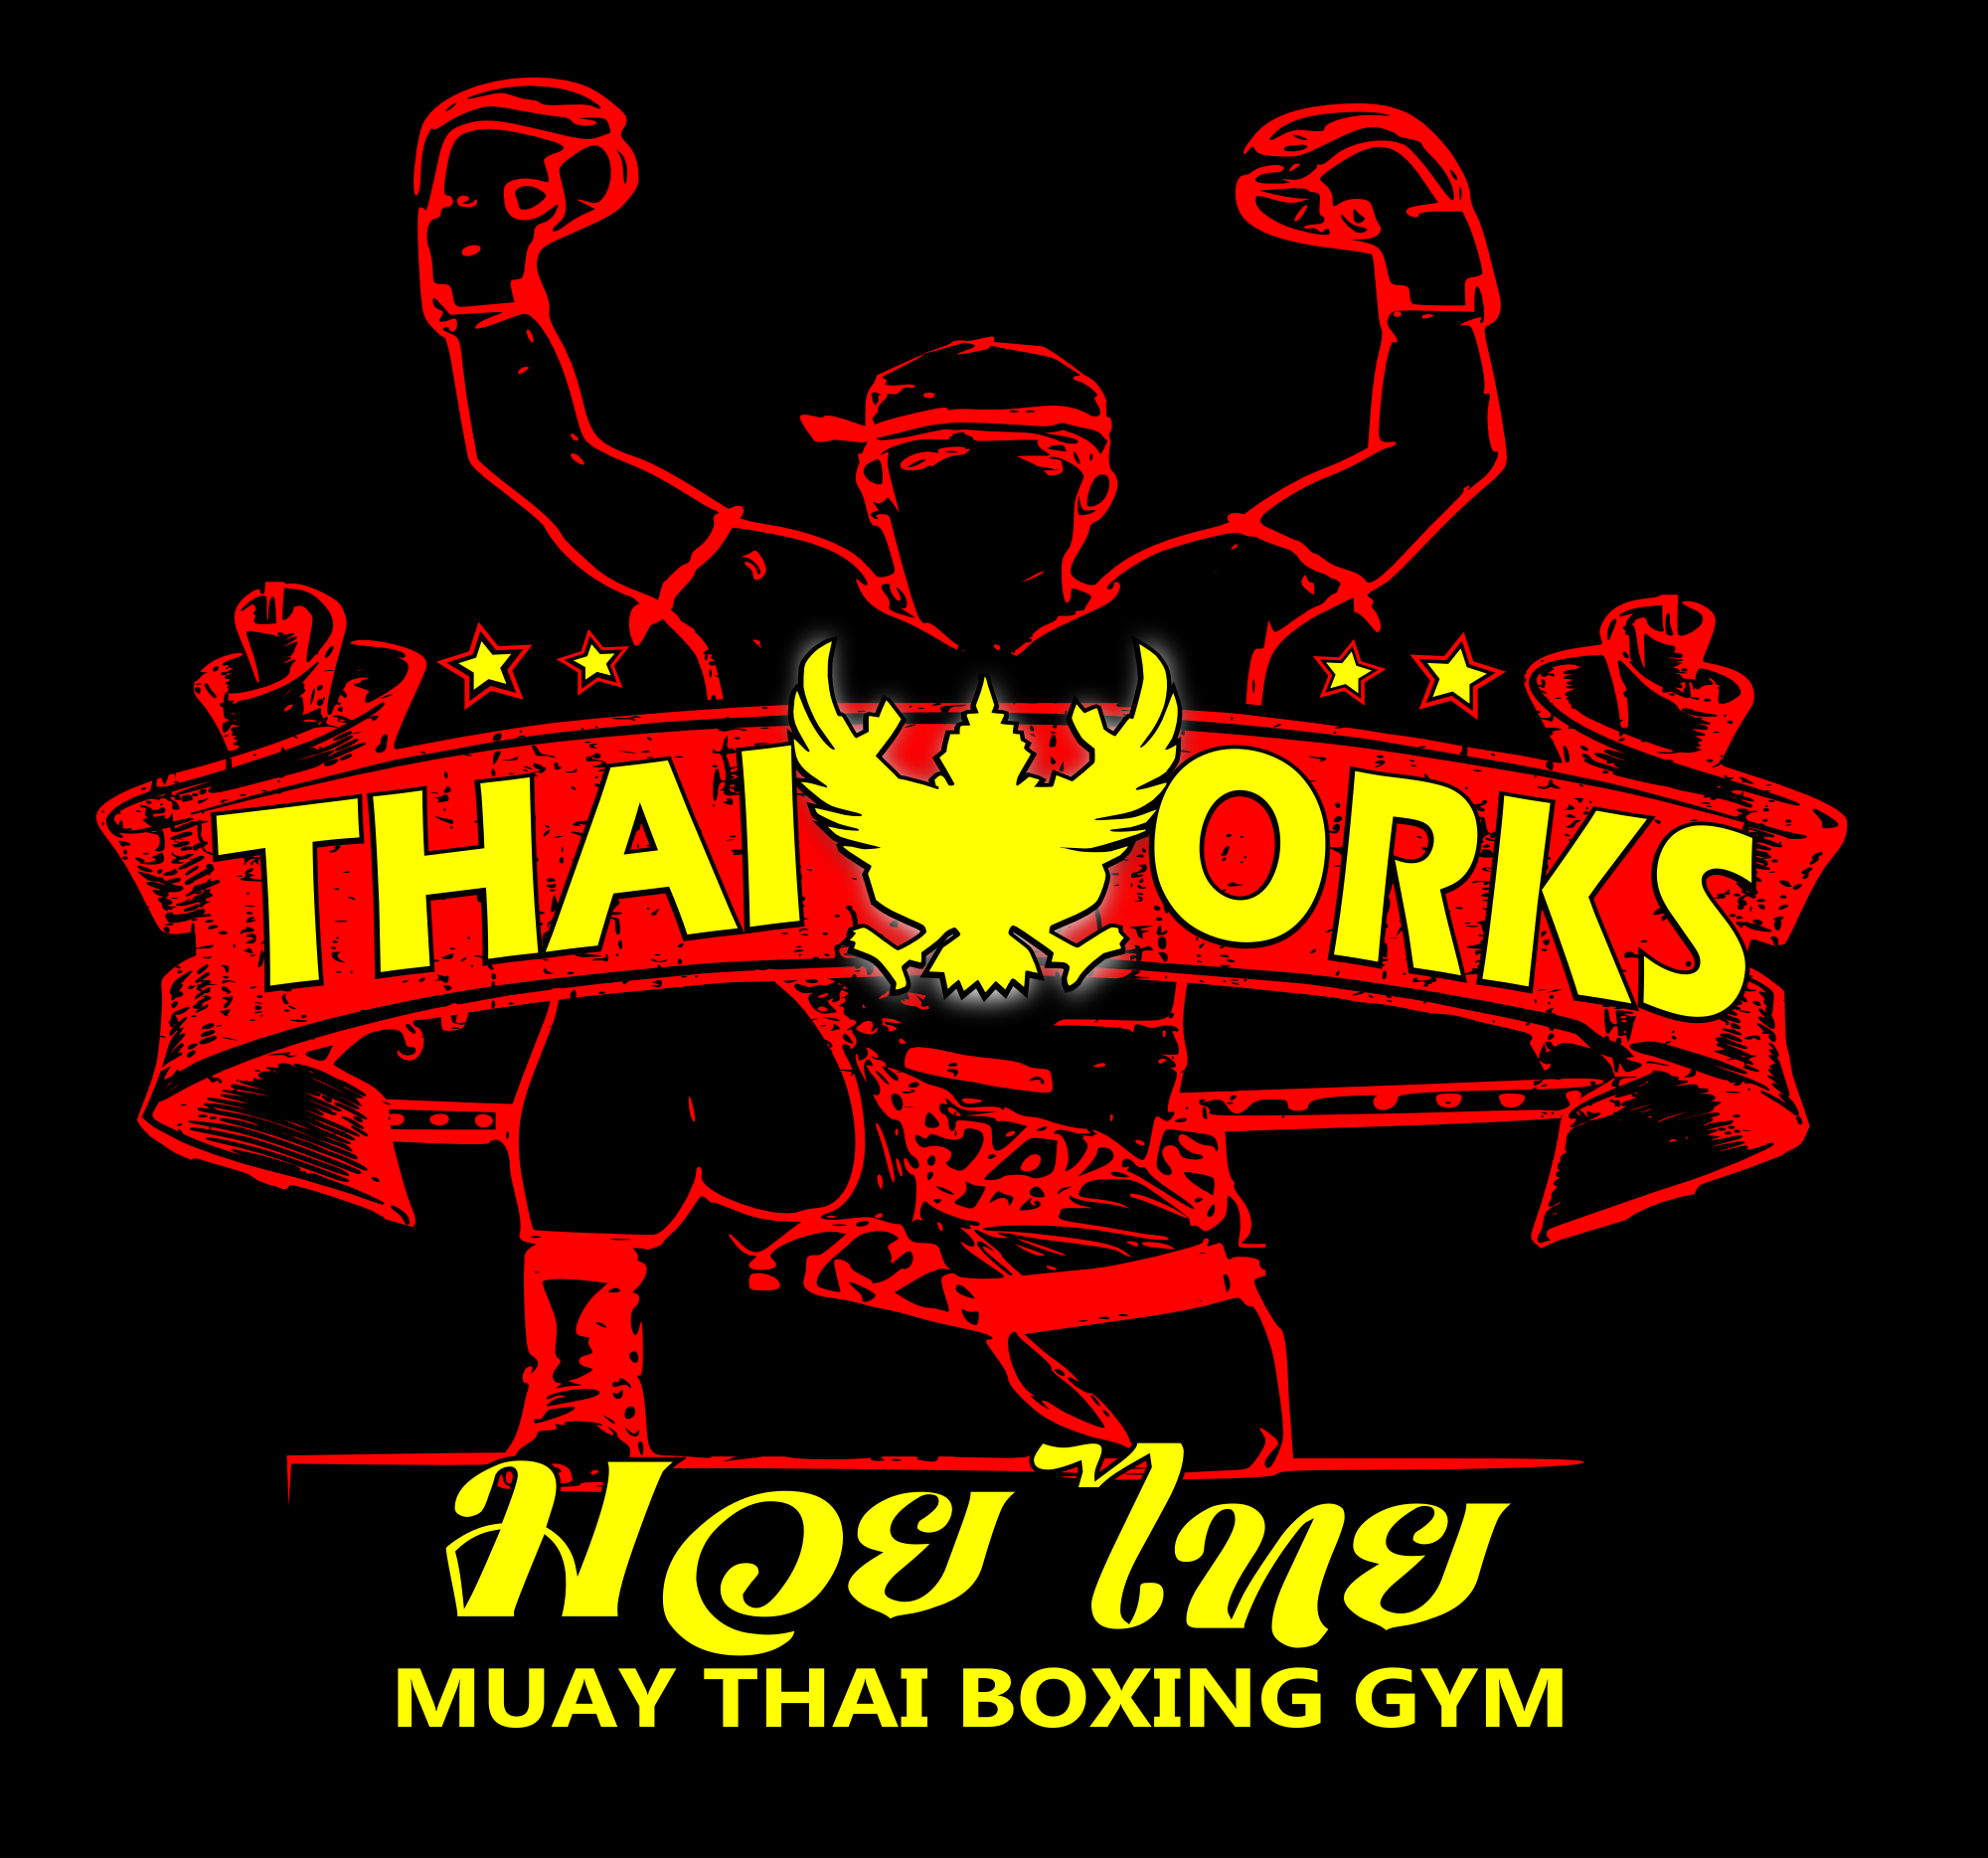 Muay Thai Boxing Gym, Fitness, Cardio, skills and pad drills!!
We run our classes on Mondays Wednesday and Friday, we cater for beginners to fighters.